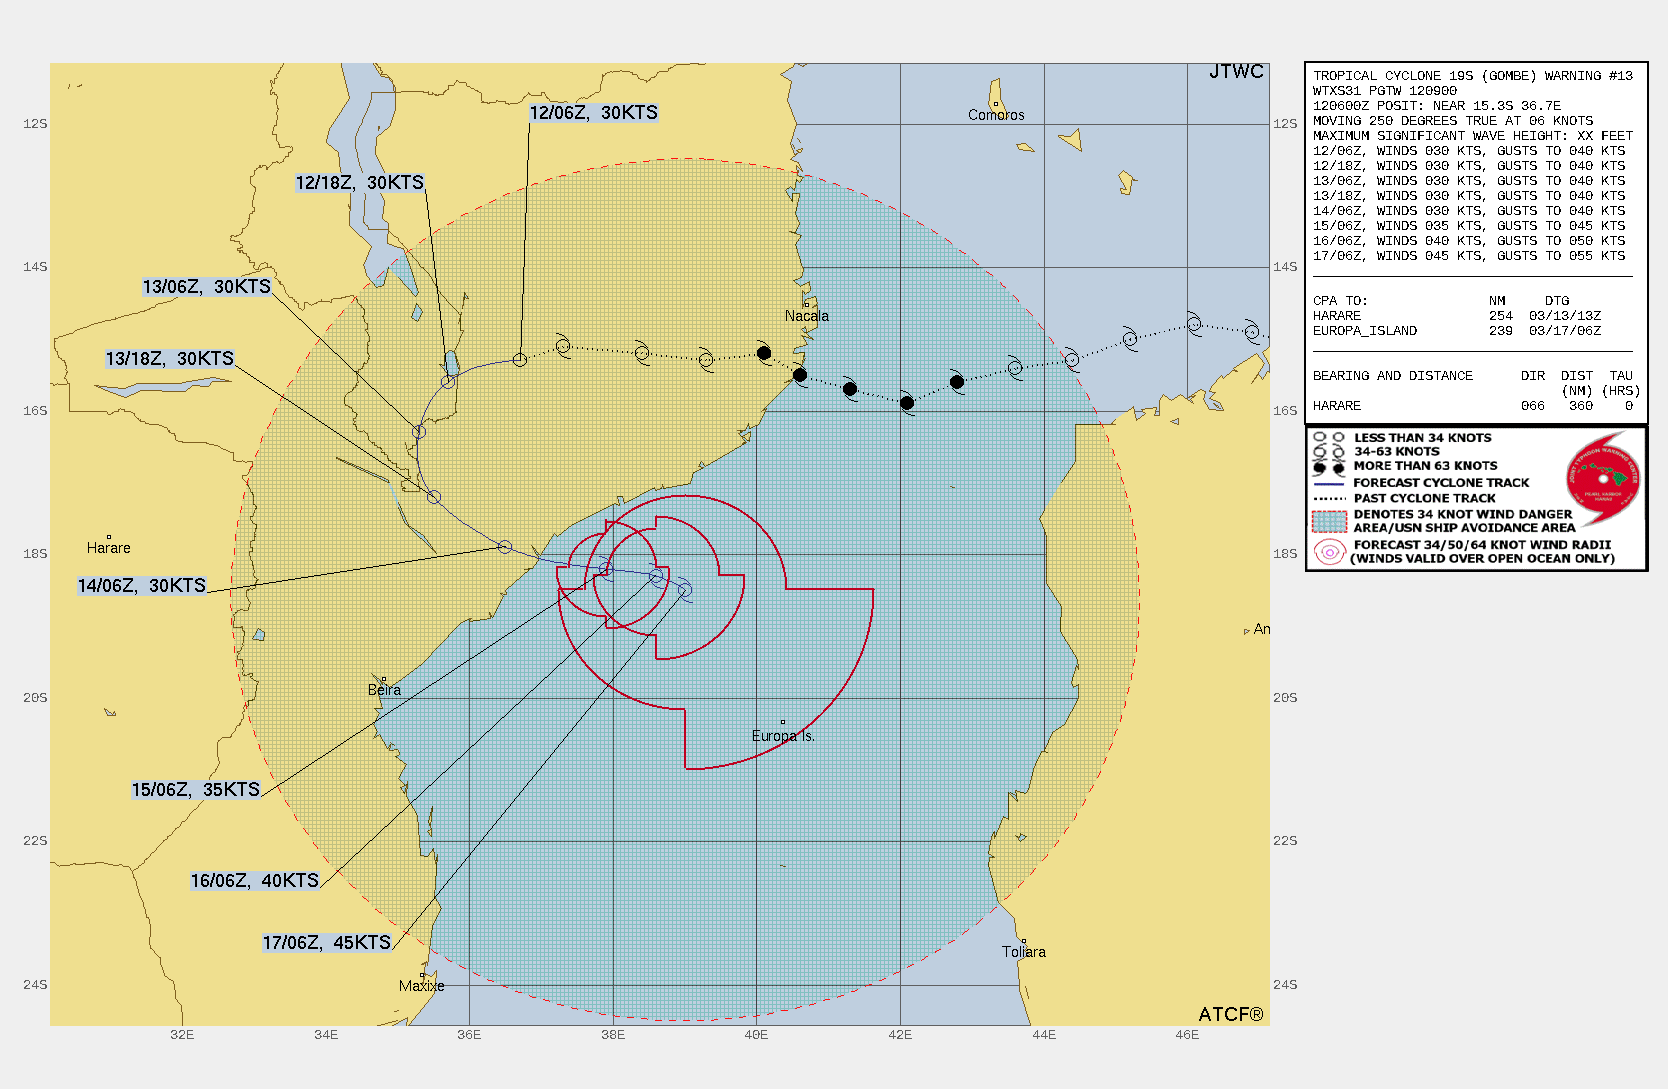 FORECAST REASONING.  SIGNIFICANT FORECAST CHANGES: THE EXTENDED FORECAST INTENSITIES OVER THE MOZAMBIQUE CHANNEL HAS BEEN INCREASED TO ABOVE 35 KTS; OTHERWISE, THERE ARE NO SIGNIFICANT CHANGES TO THE FORECAST FROM THE  PREVIOUS WARNING.   FORECAST DISCUSSION: TC 19S IS STRUGGLING TO REMAIN INTACT AS IT MOVES OVER THE RUGGED TERRAIN OF MOZAMBIQUE. TC 19S IS EXPECTED TO  RECURVE TO THE SOUTHWEST AS IT BEGINS ROUNDING THE FAR WESTERN EDGE  OF THE SUBTROPICAL RIDGE (STR) AXIS TO THE EAST-SOUTHEAST THROUGH THE NEXT 36-48 HOURS.  BY 48H, OR SLIGHTLY AFTER, TC 19S IS EXPECTED TO REGAIN ITS  MOISTURE SOURCE AS IT ENTERS BACK OVER THE MOZAMBIQUE CHANNEL NEAR  QUELIMANE AS A WEAK TROPICAL DEPRESSION AND THEN WILL REGAIN  INTENSITY TO TROPICAL STORM STRENGTH OVER THE NEXT 72-120 HOURS.